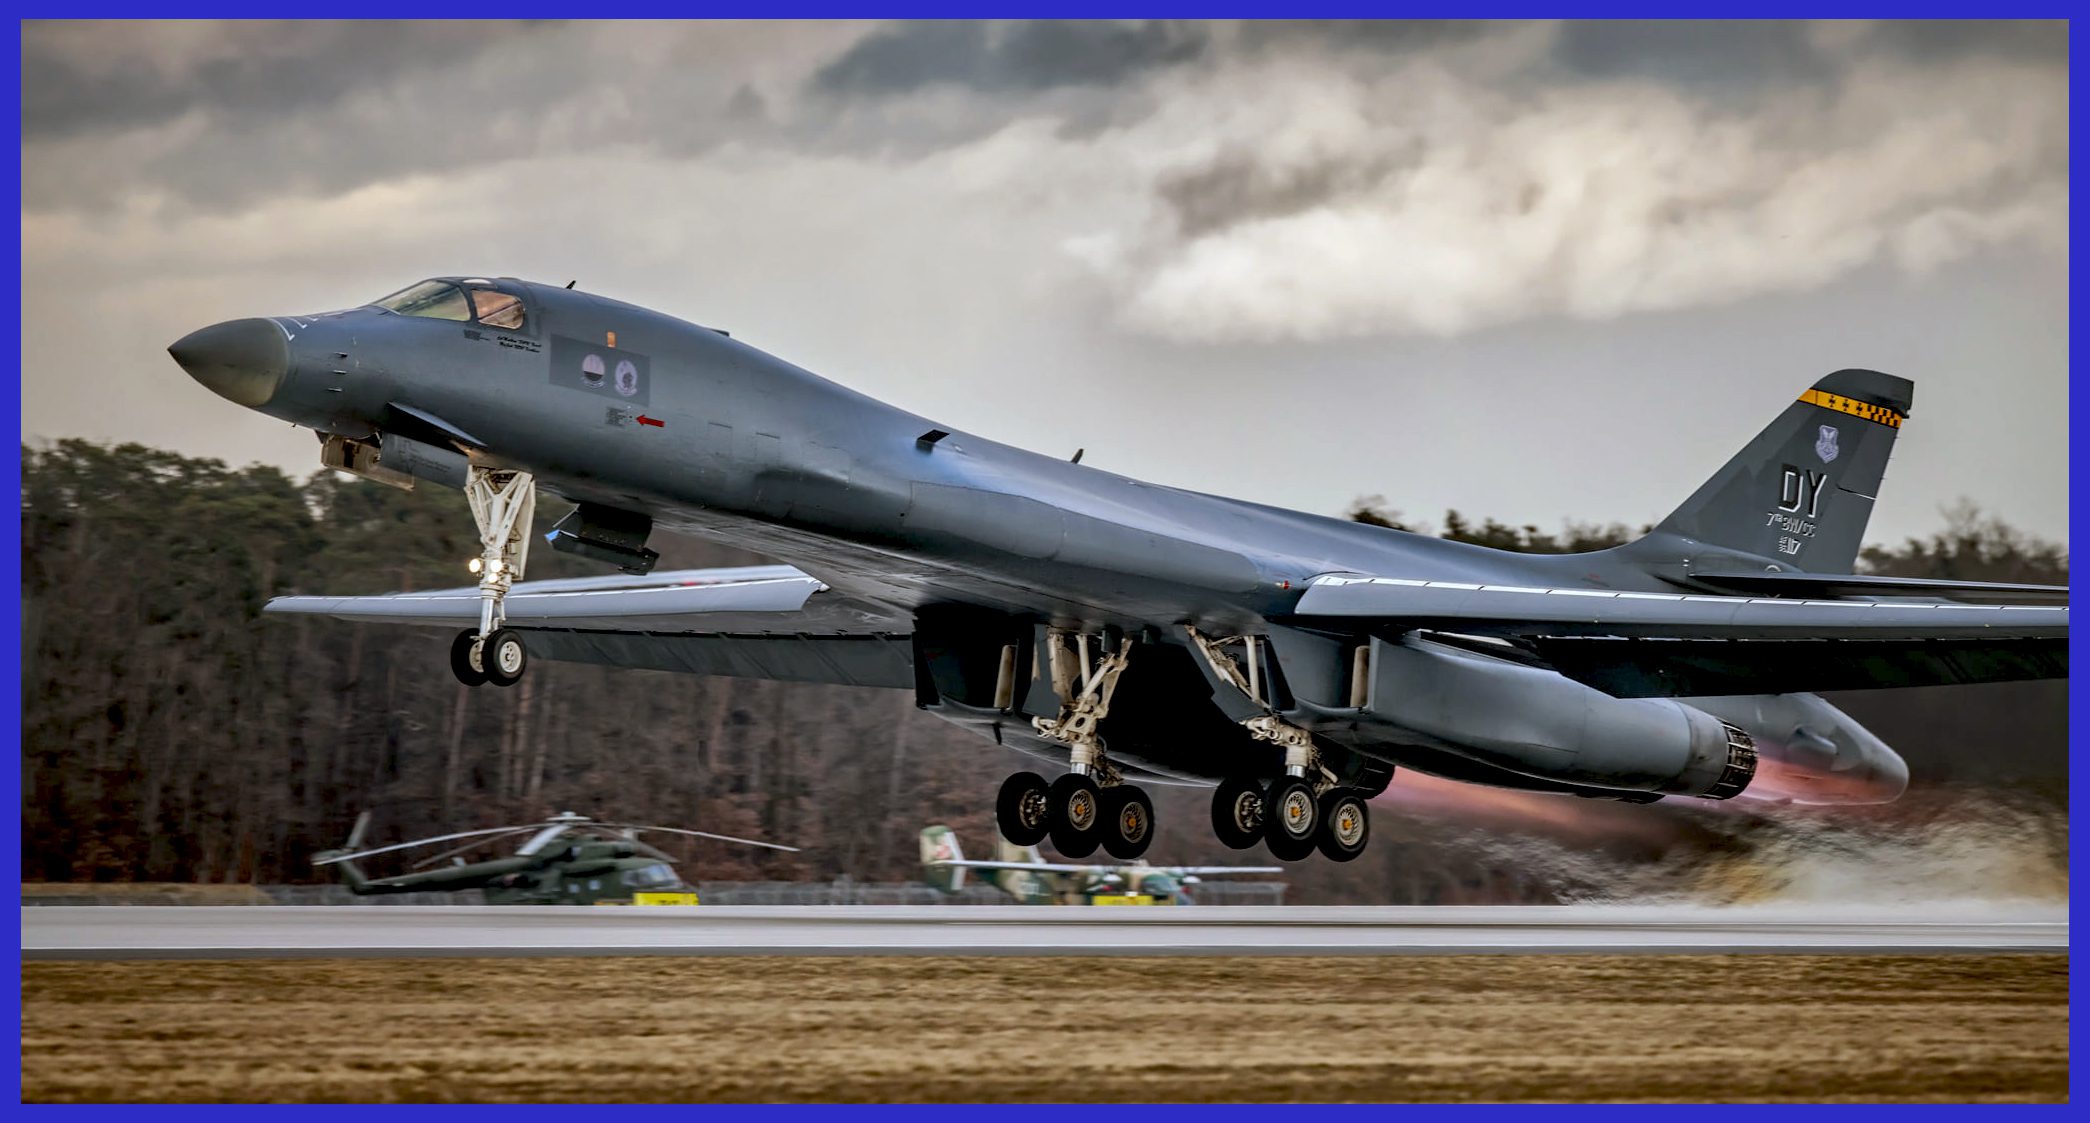 Photo Credit: Hesja Air-Art Photography / a B-1B Lancer has just taken off from Dyess Air Force Base.